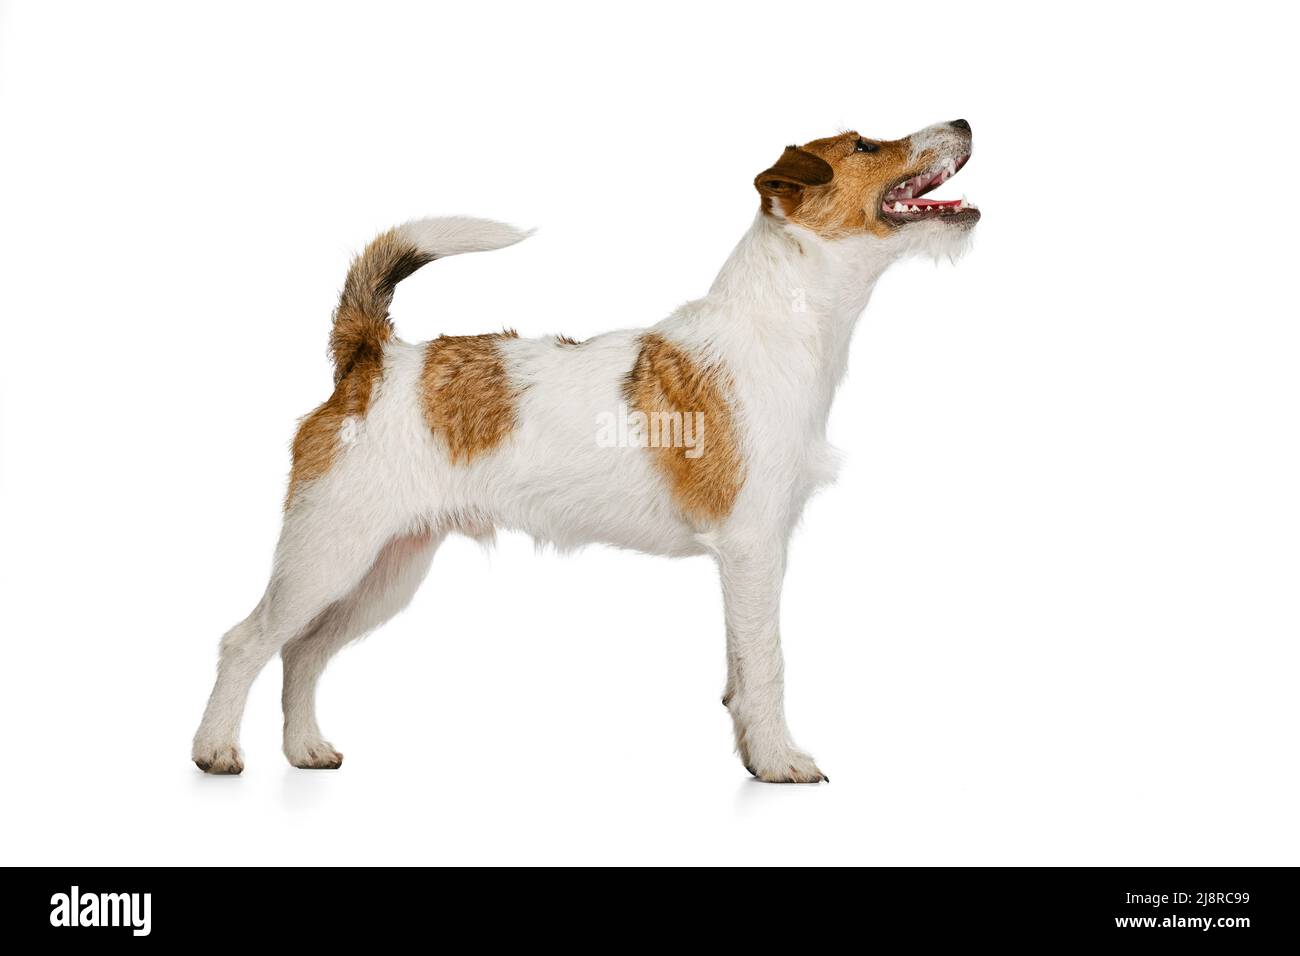 Short-haired Jack russell terrier dog posing isolated on white background. Concept of animal, breed, vet, health and care Stock Photo